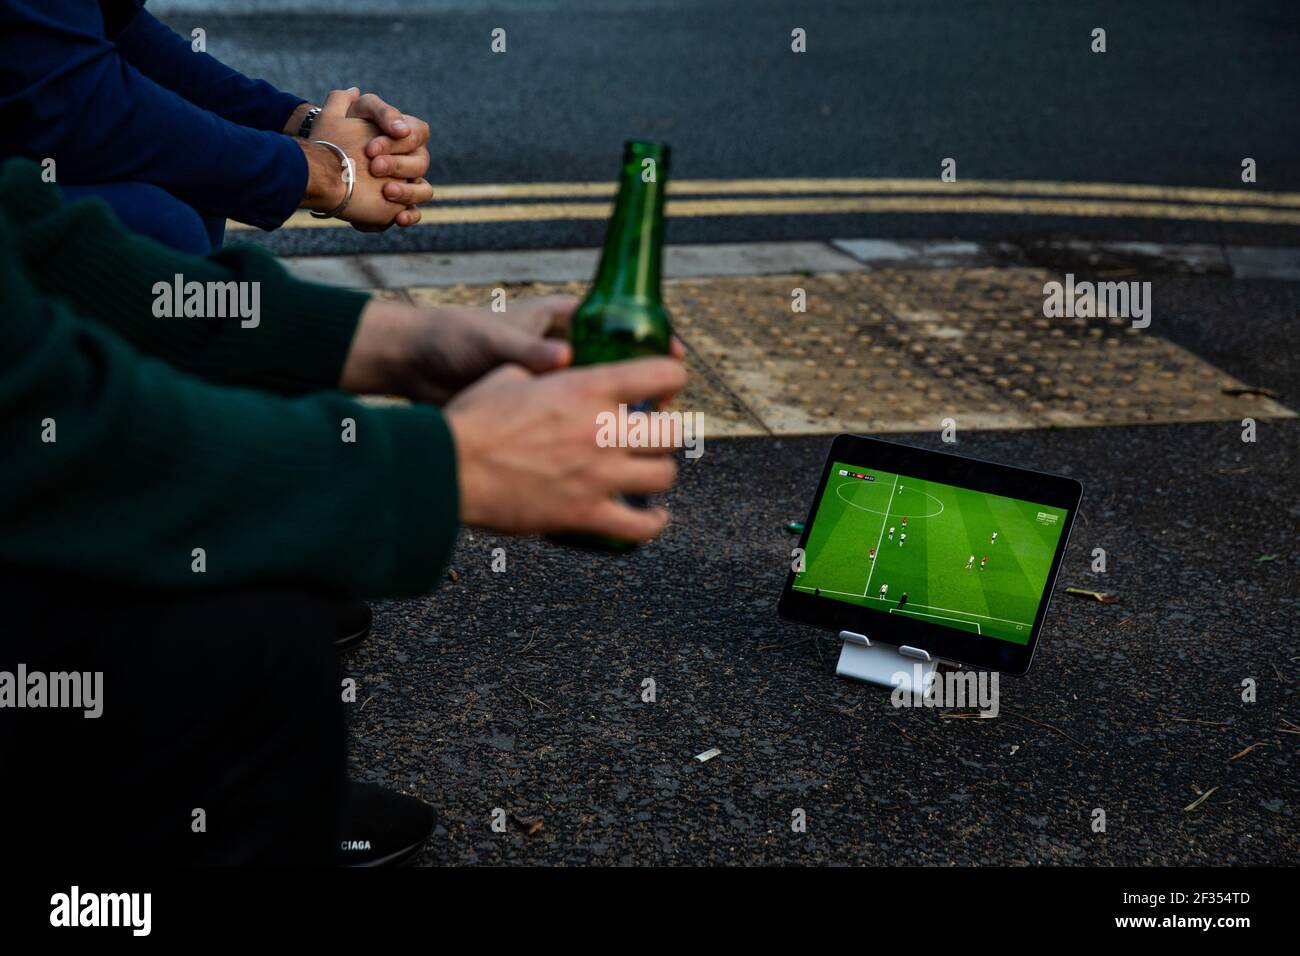 Two Tottenham Hotspur fans watching the game Sky GO app on the iPad outside the ground during the Premier League match back following the Coronavirus Stock Photo